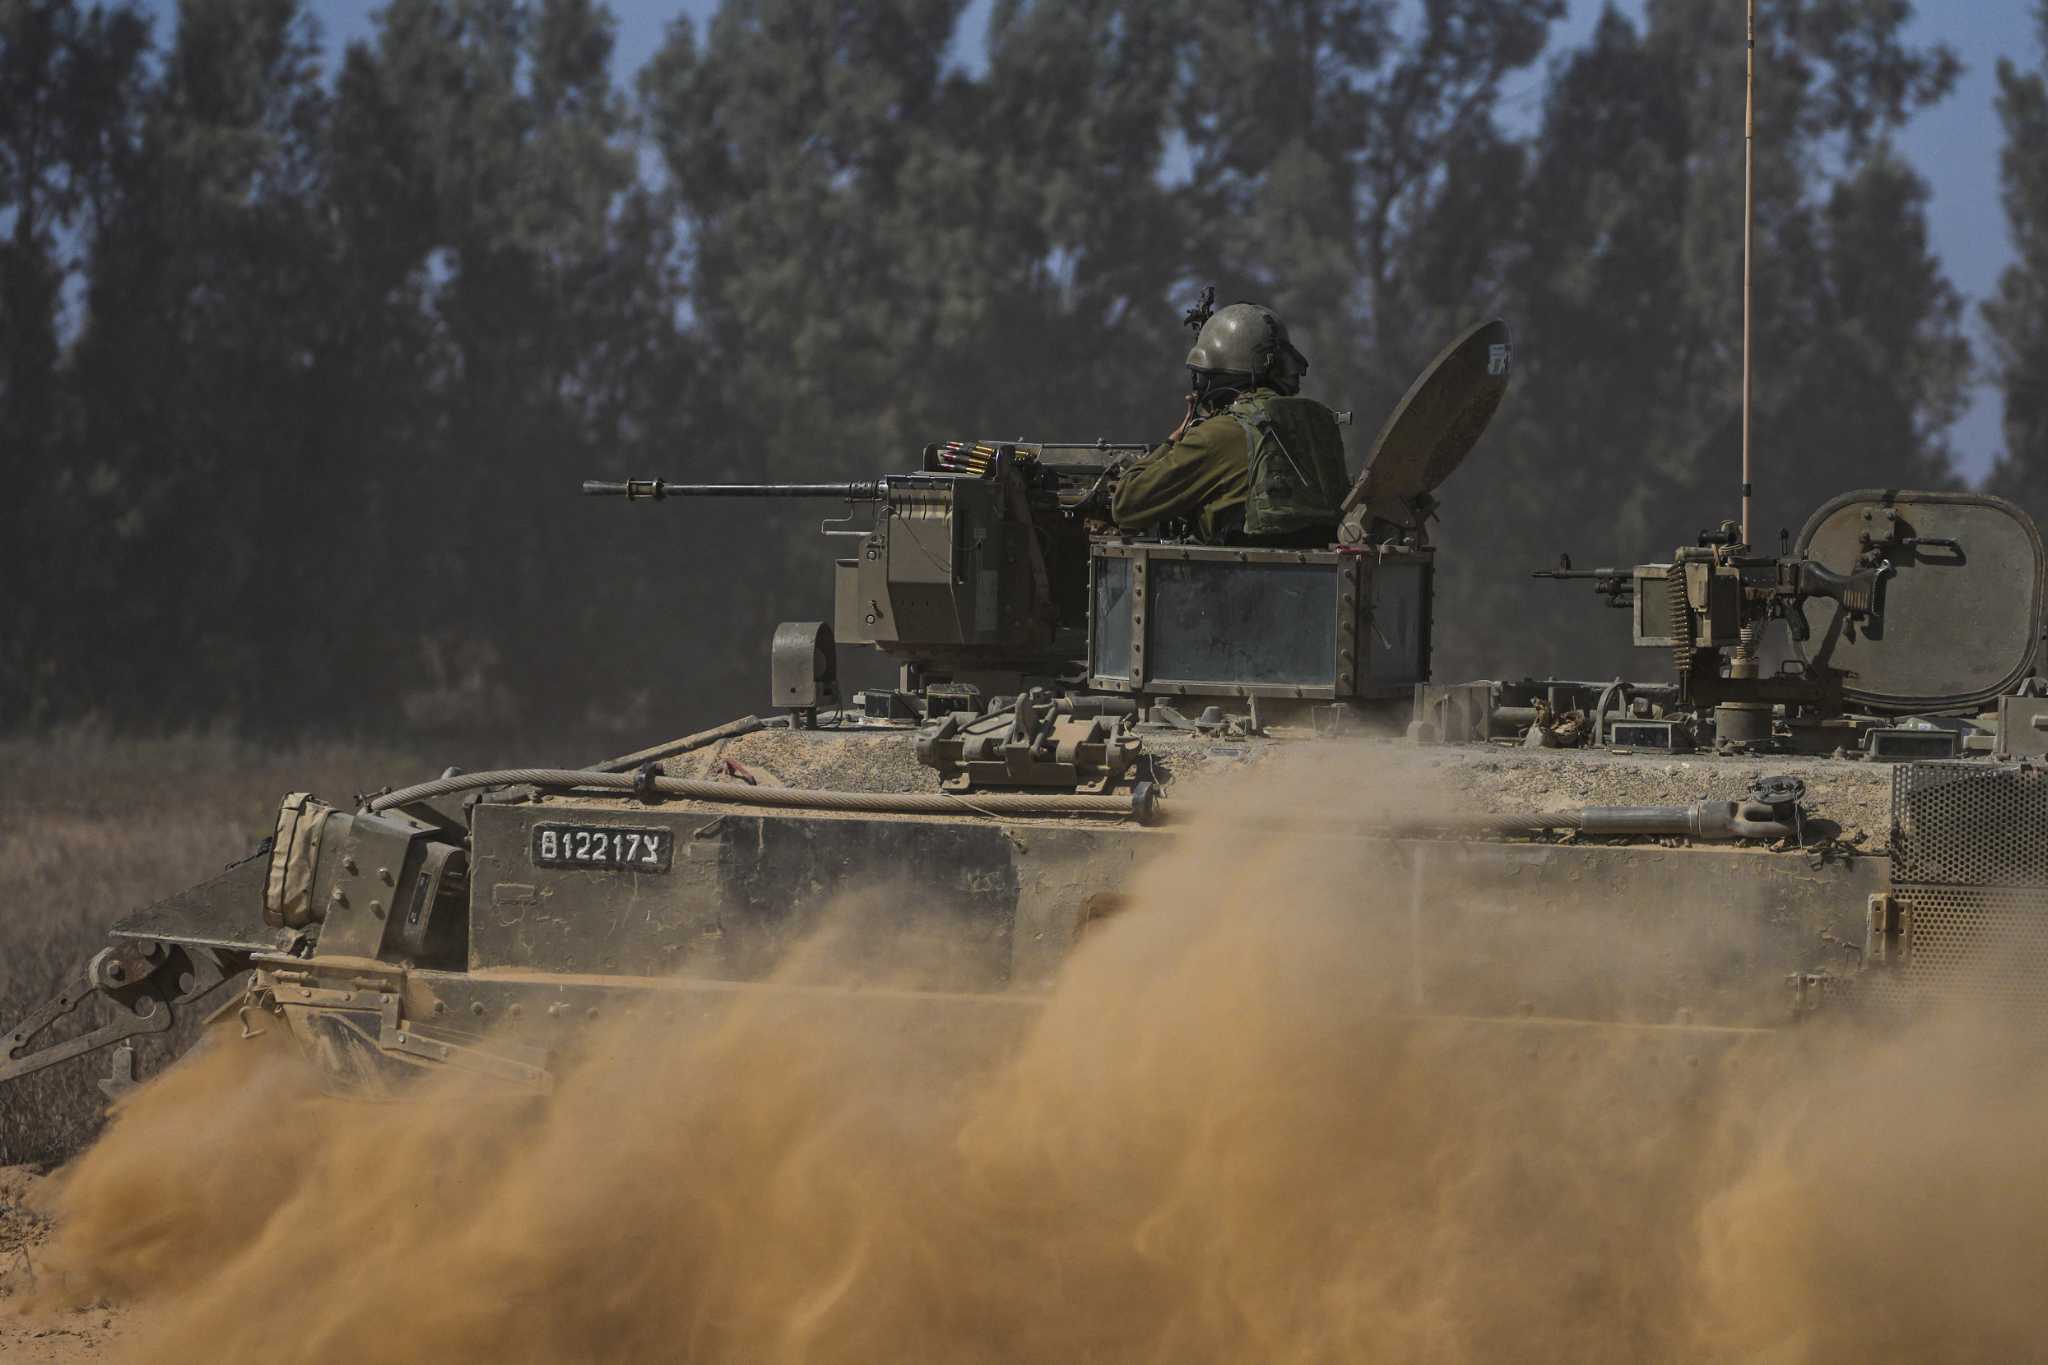 The Latest | 2 soldiers are killed in a West Bank car-ramming attack, Israeli military says